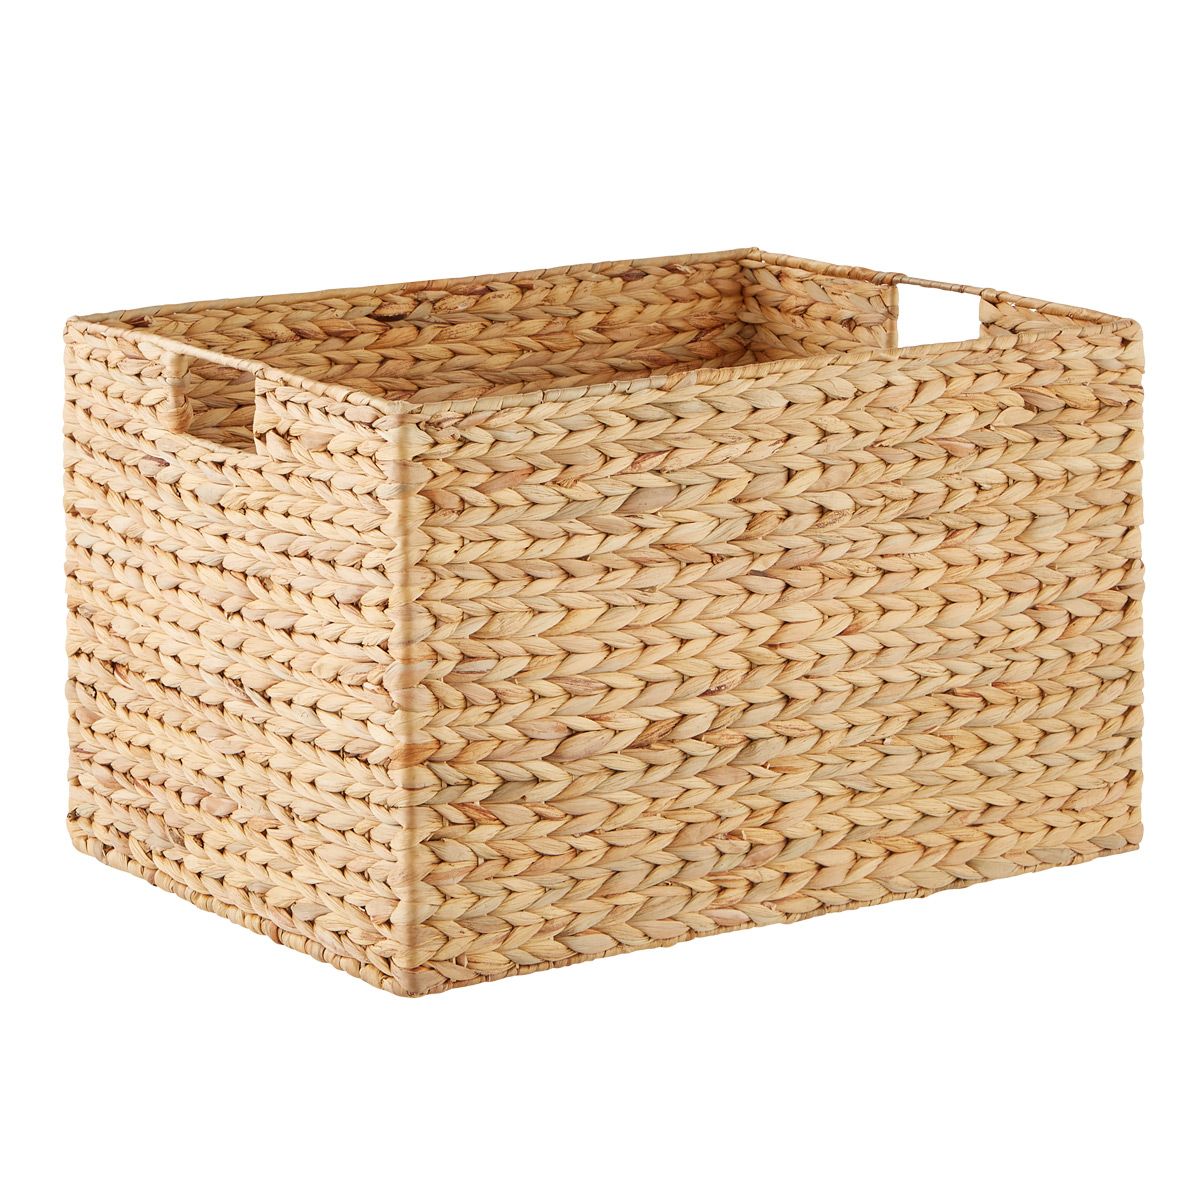 X-Large Water Hyacinth Bin NaturalSKU:100852634.8252 Reviews | The Container Store